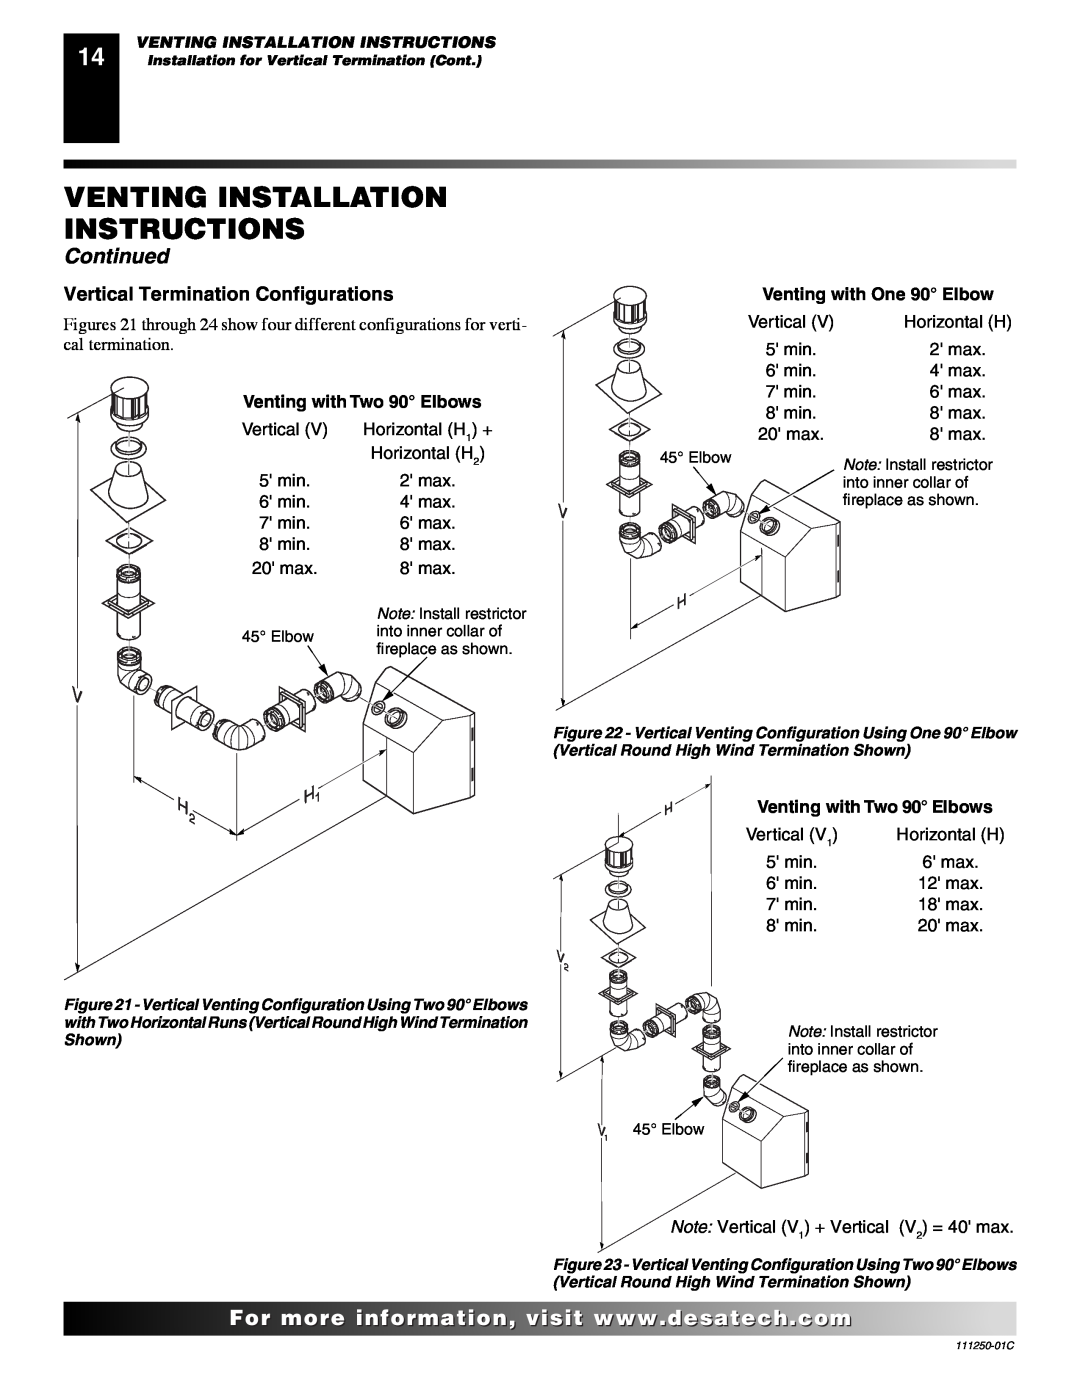 Desa (V)T36NA SERIES installation manual Venting Installation Instructions, Continued, Vertical Termination Configurations 